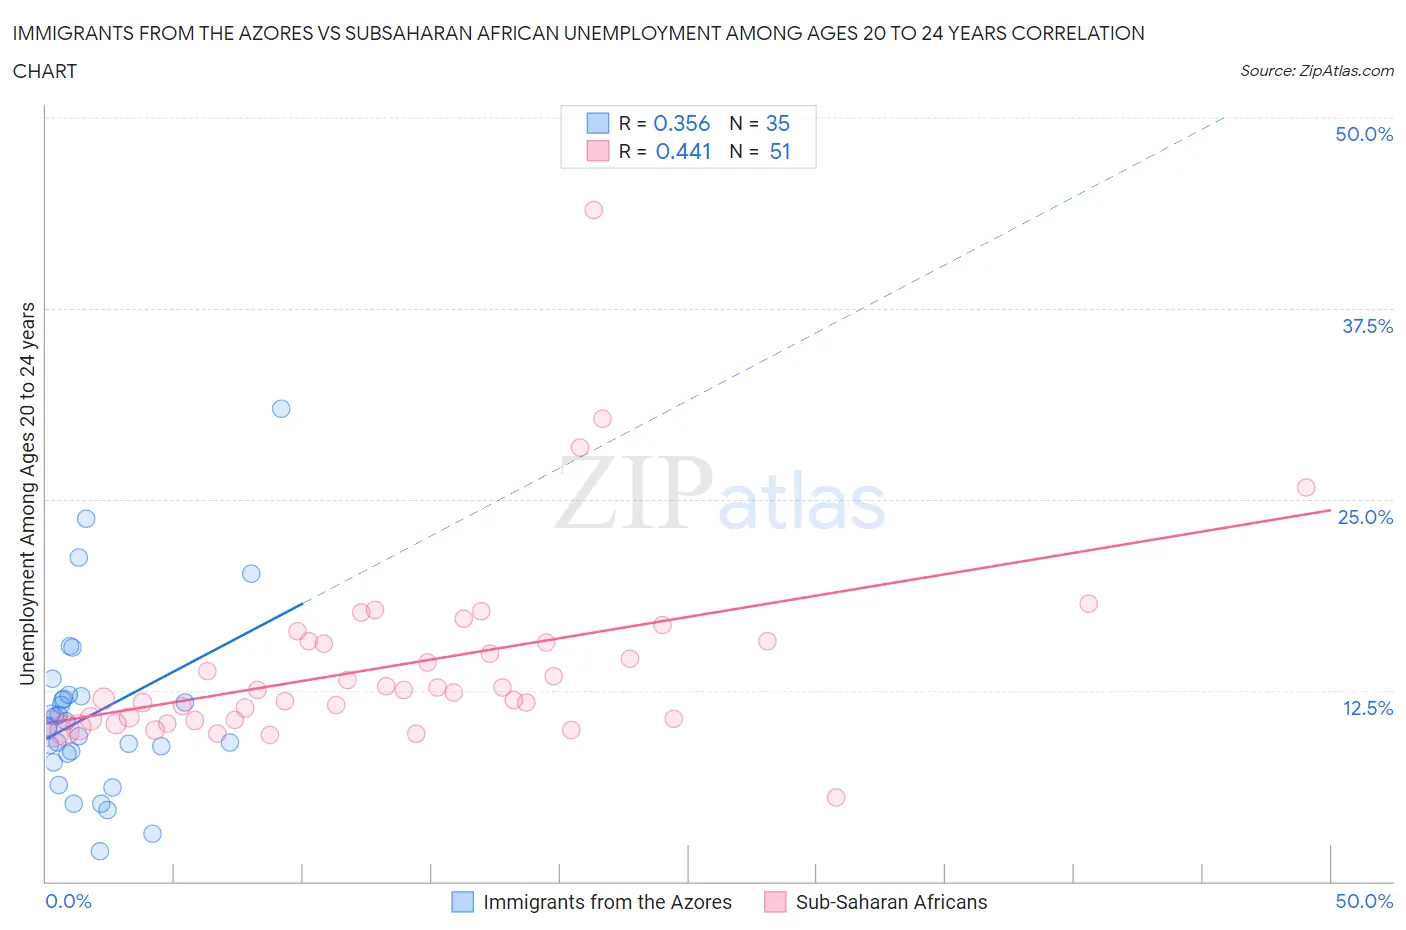 Immigrants from the Azores vs Subsaharan African Unemployment Among Ages 20 to 24 years